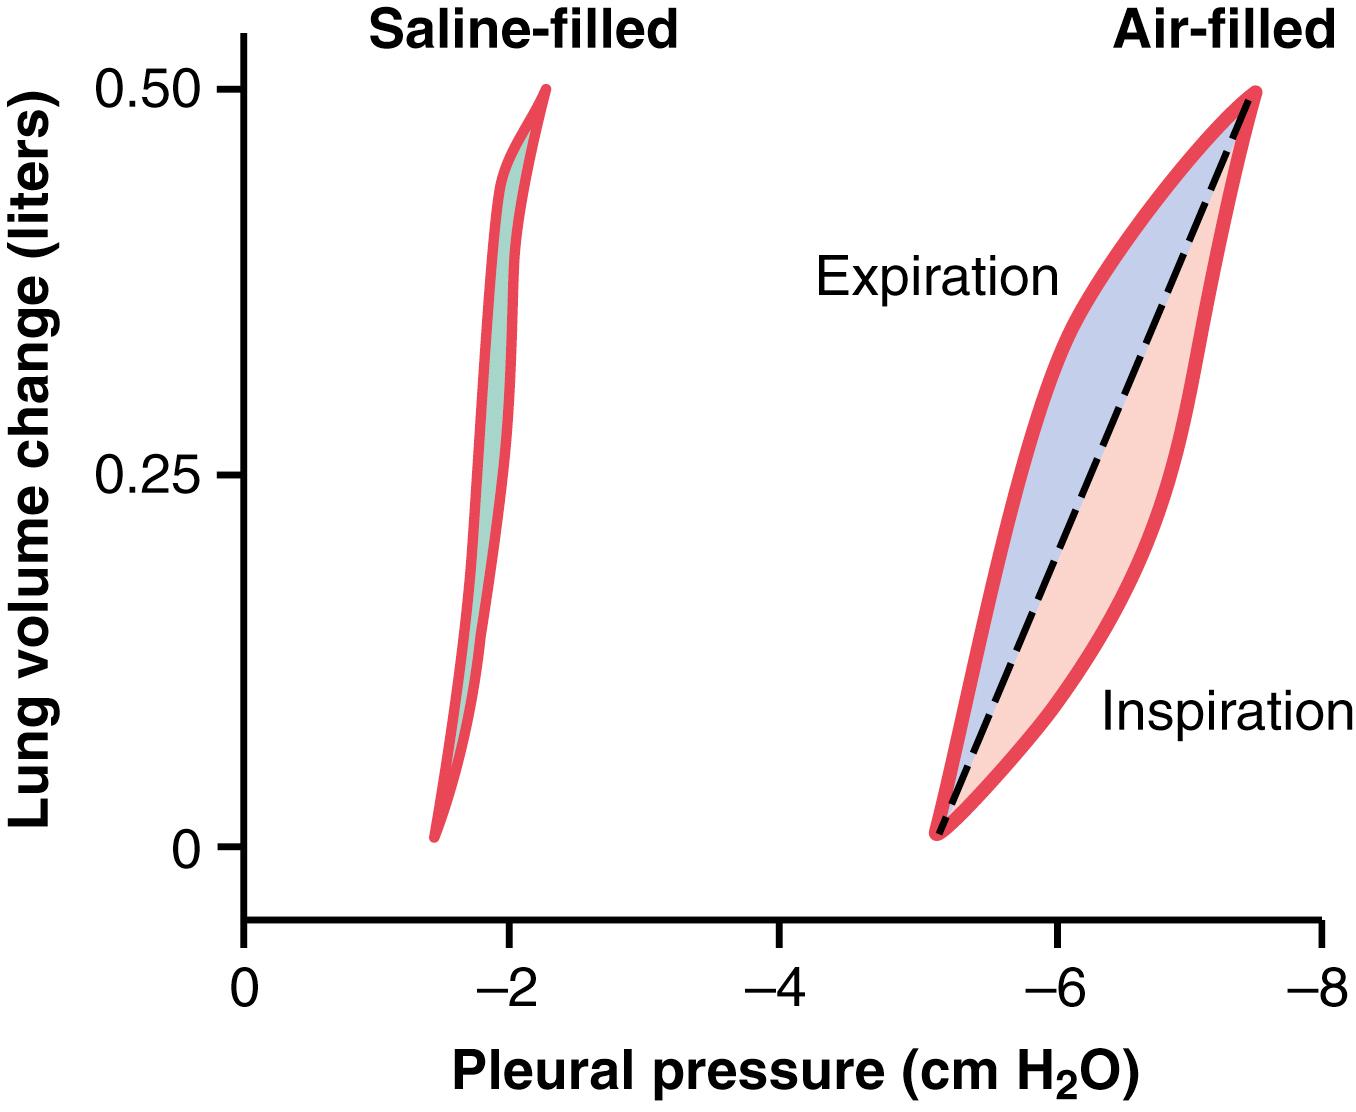 Figure 38-4, Comparison of the compliance diagrams of saline-filled and air-filled lungs when the alveolar pressure is maintained at atmospheric pressure (0 cm H 2 O) and pleural pressure is changed to change the transpulmonary pressure.